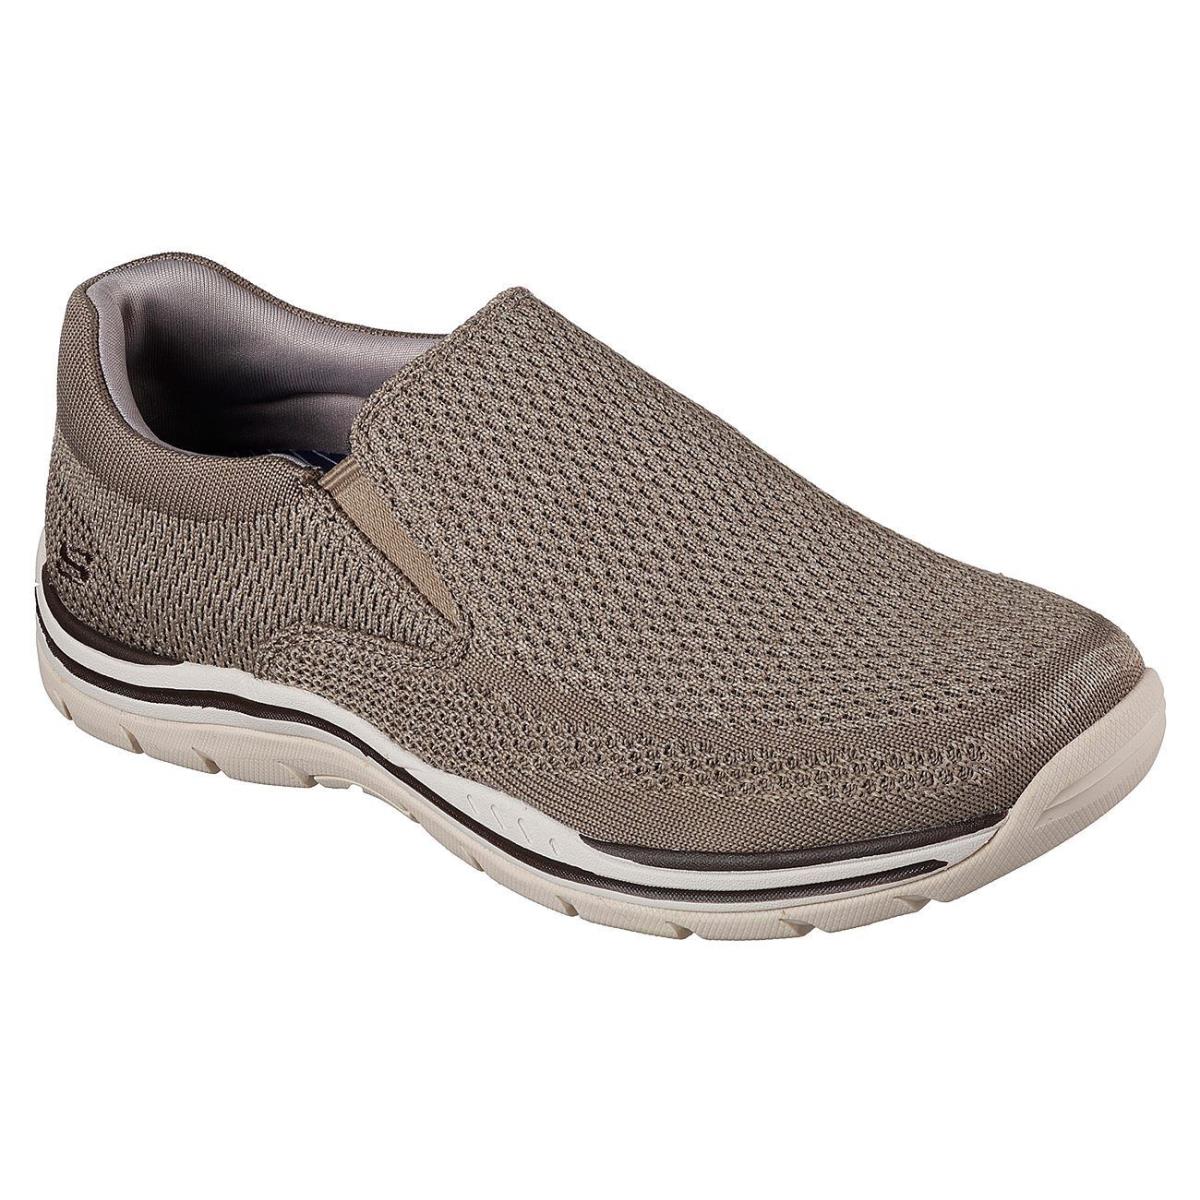 Men`s Skechers Relaxed Expected Gomel Loafer Shoes 65086 /tpe Sizes 8-14 Taupe - Taupe